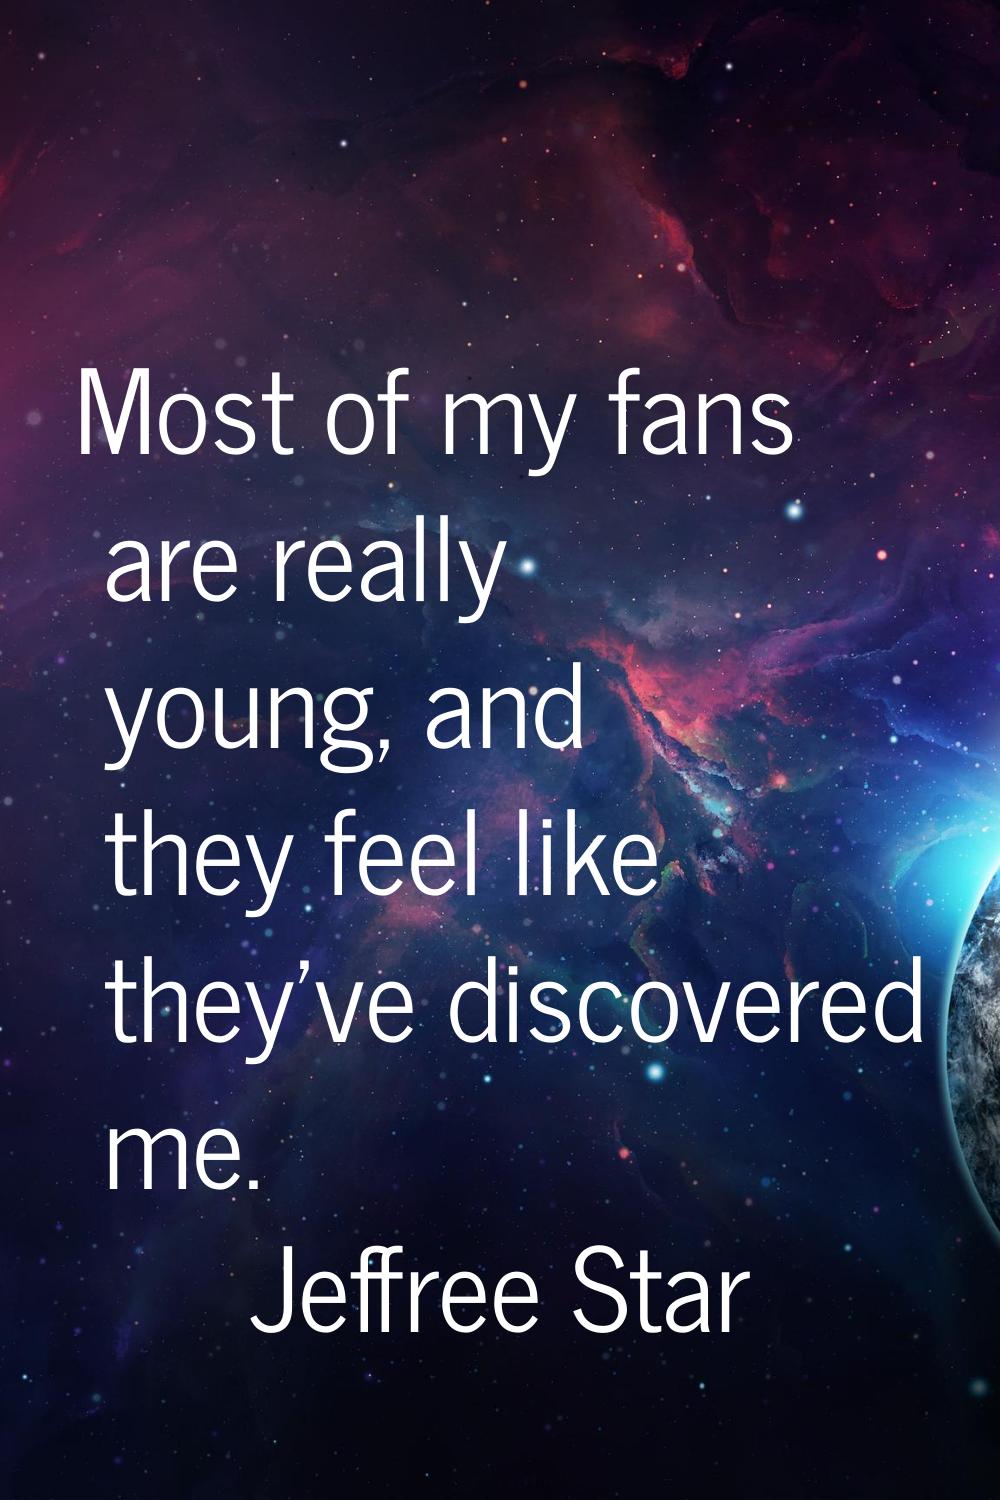 Most of my fans are really young, and they feel like they've discovered me.